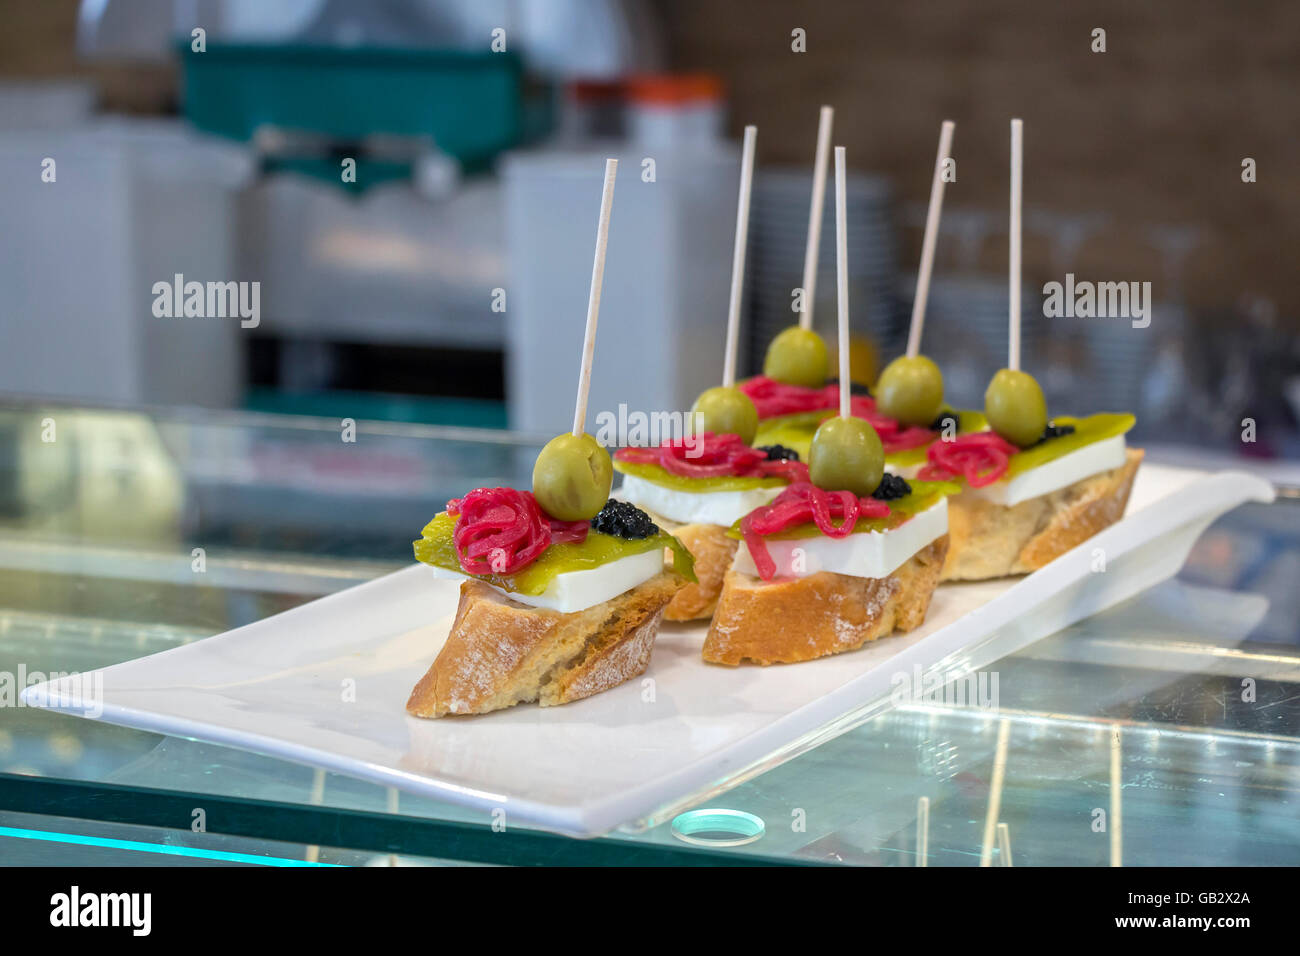 Pintxos or tapas famous spanish canapes party finger food Stock Photo